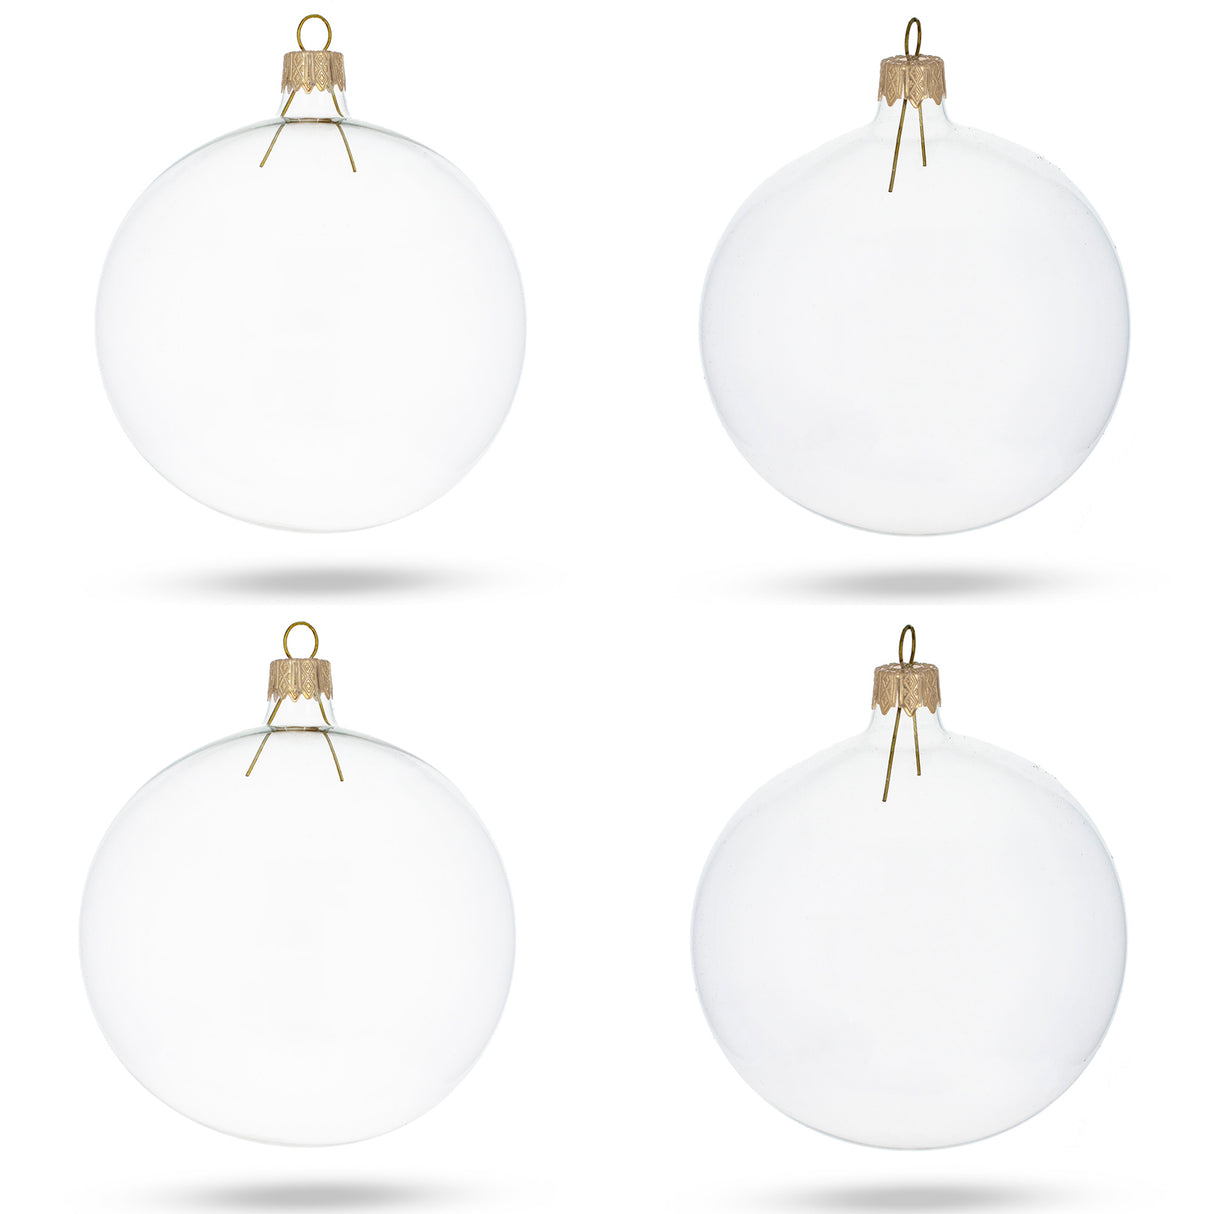 Set of 4 Clear Glass Ball Christmas Ornaments DIY Craft 4 Inches in Clear color, Round shape